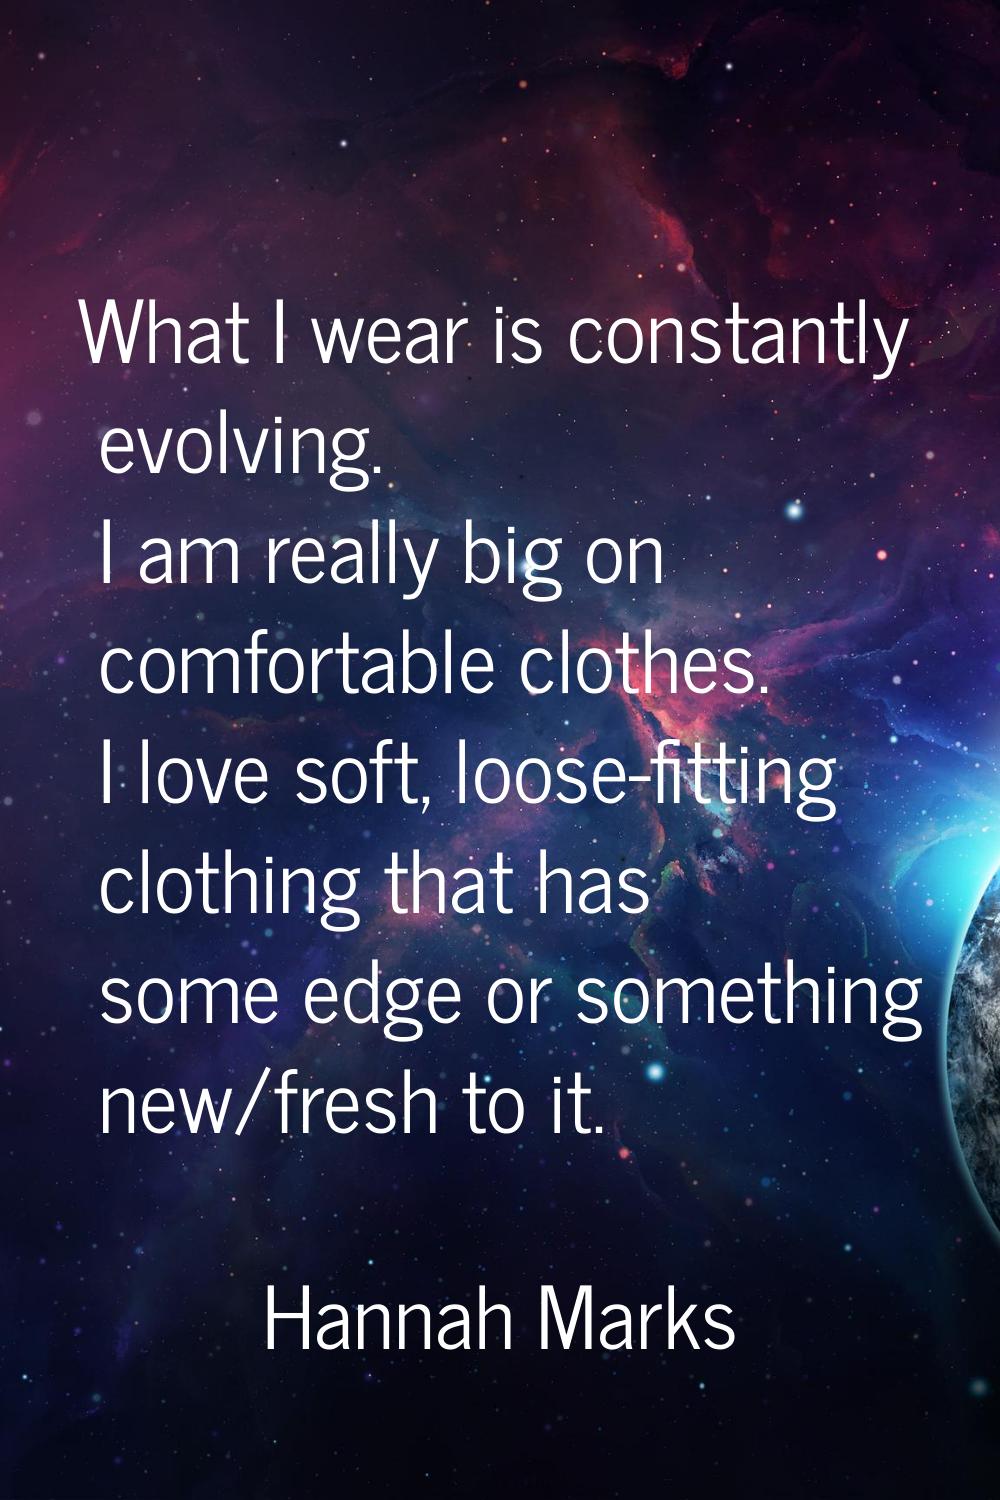 What I wear is constantly evolving. I am really big on comfortable clothes. I love soft, loose-fitt